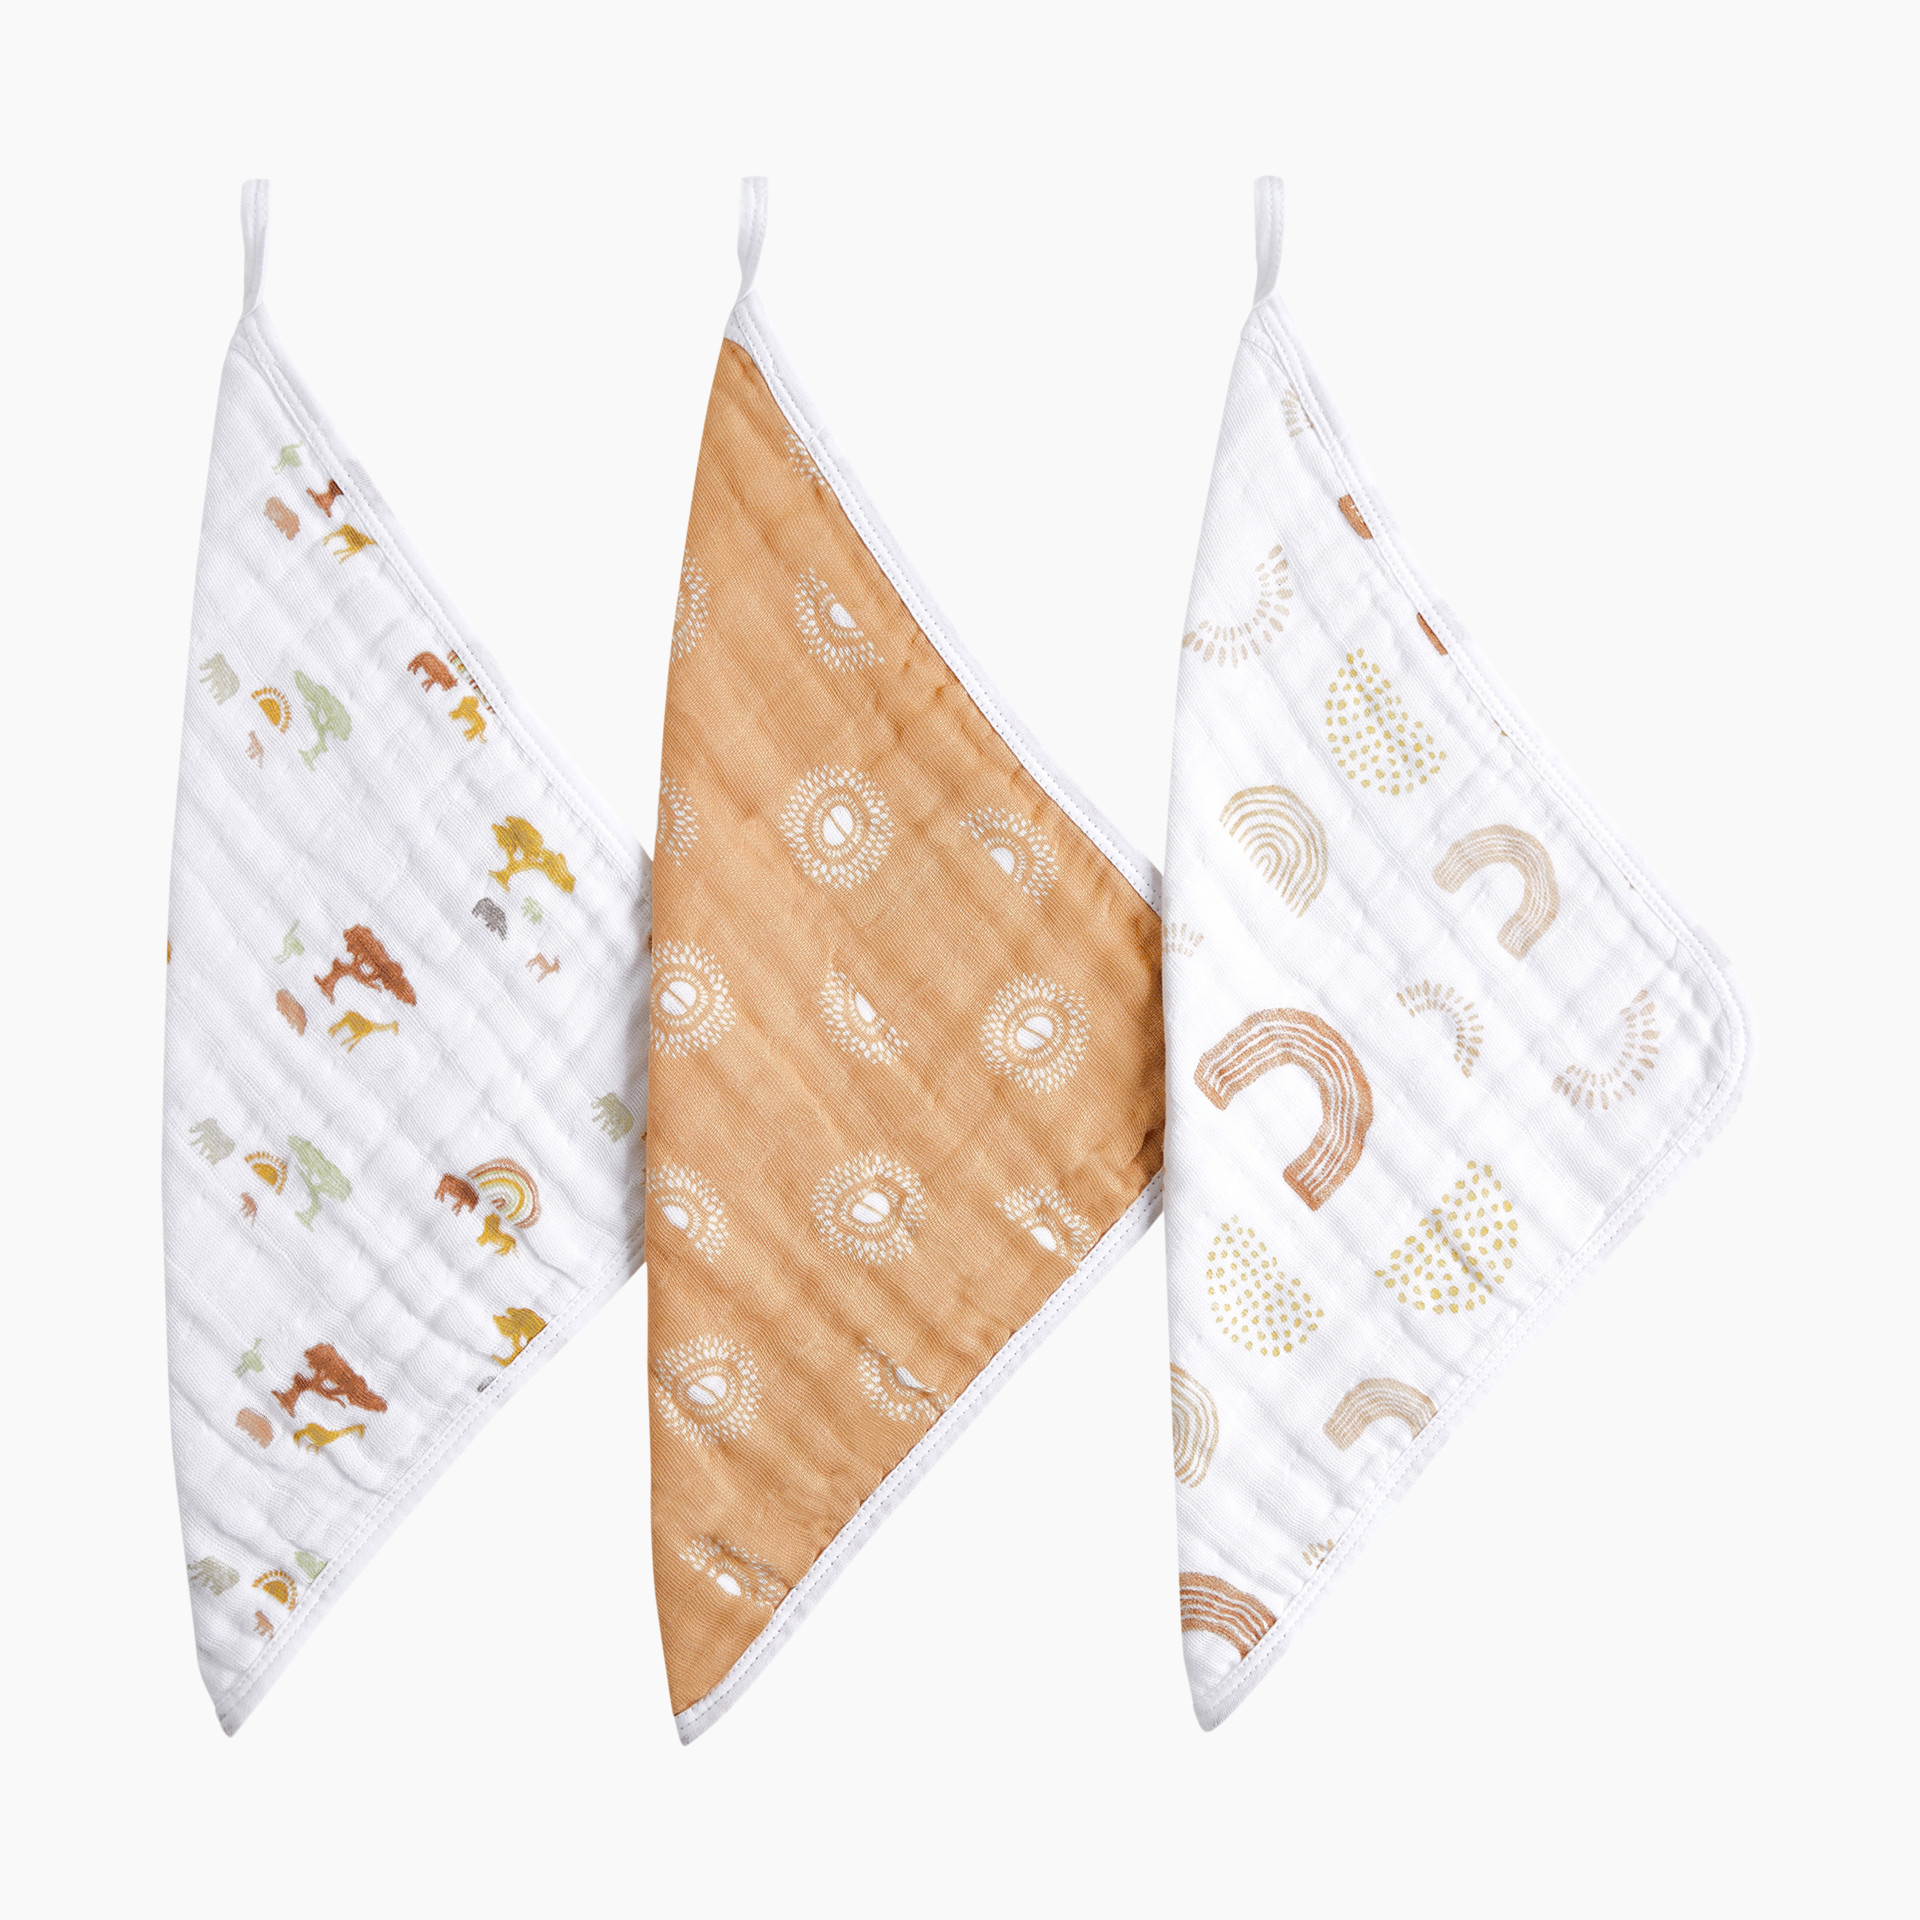 Aden + Anais Cotton Muslin Squares (3 Pack) in Keep Rising